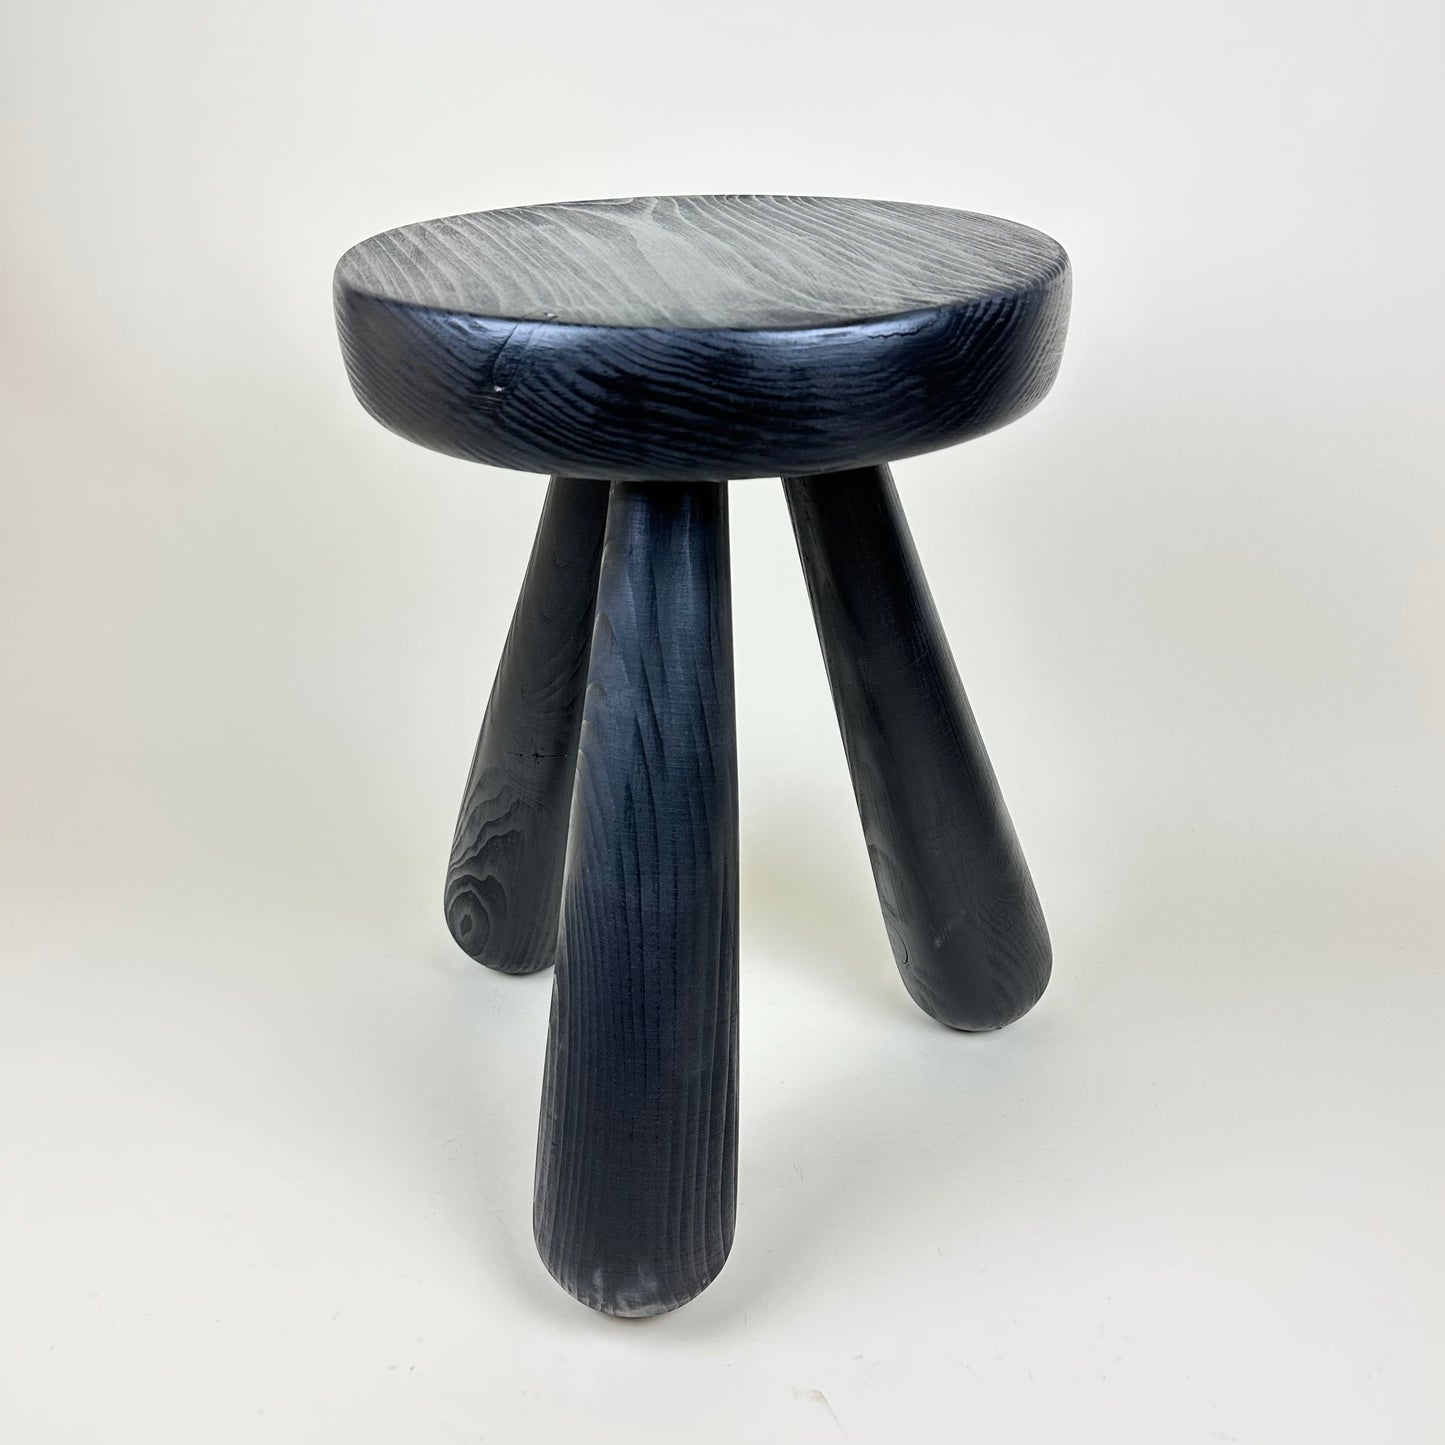 Wooden black stained pine stool